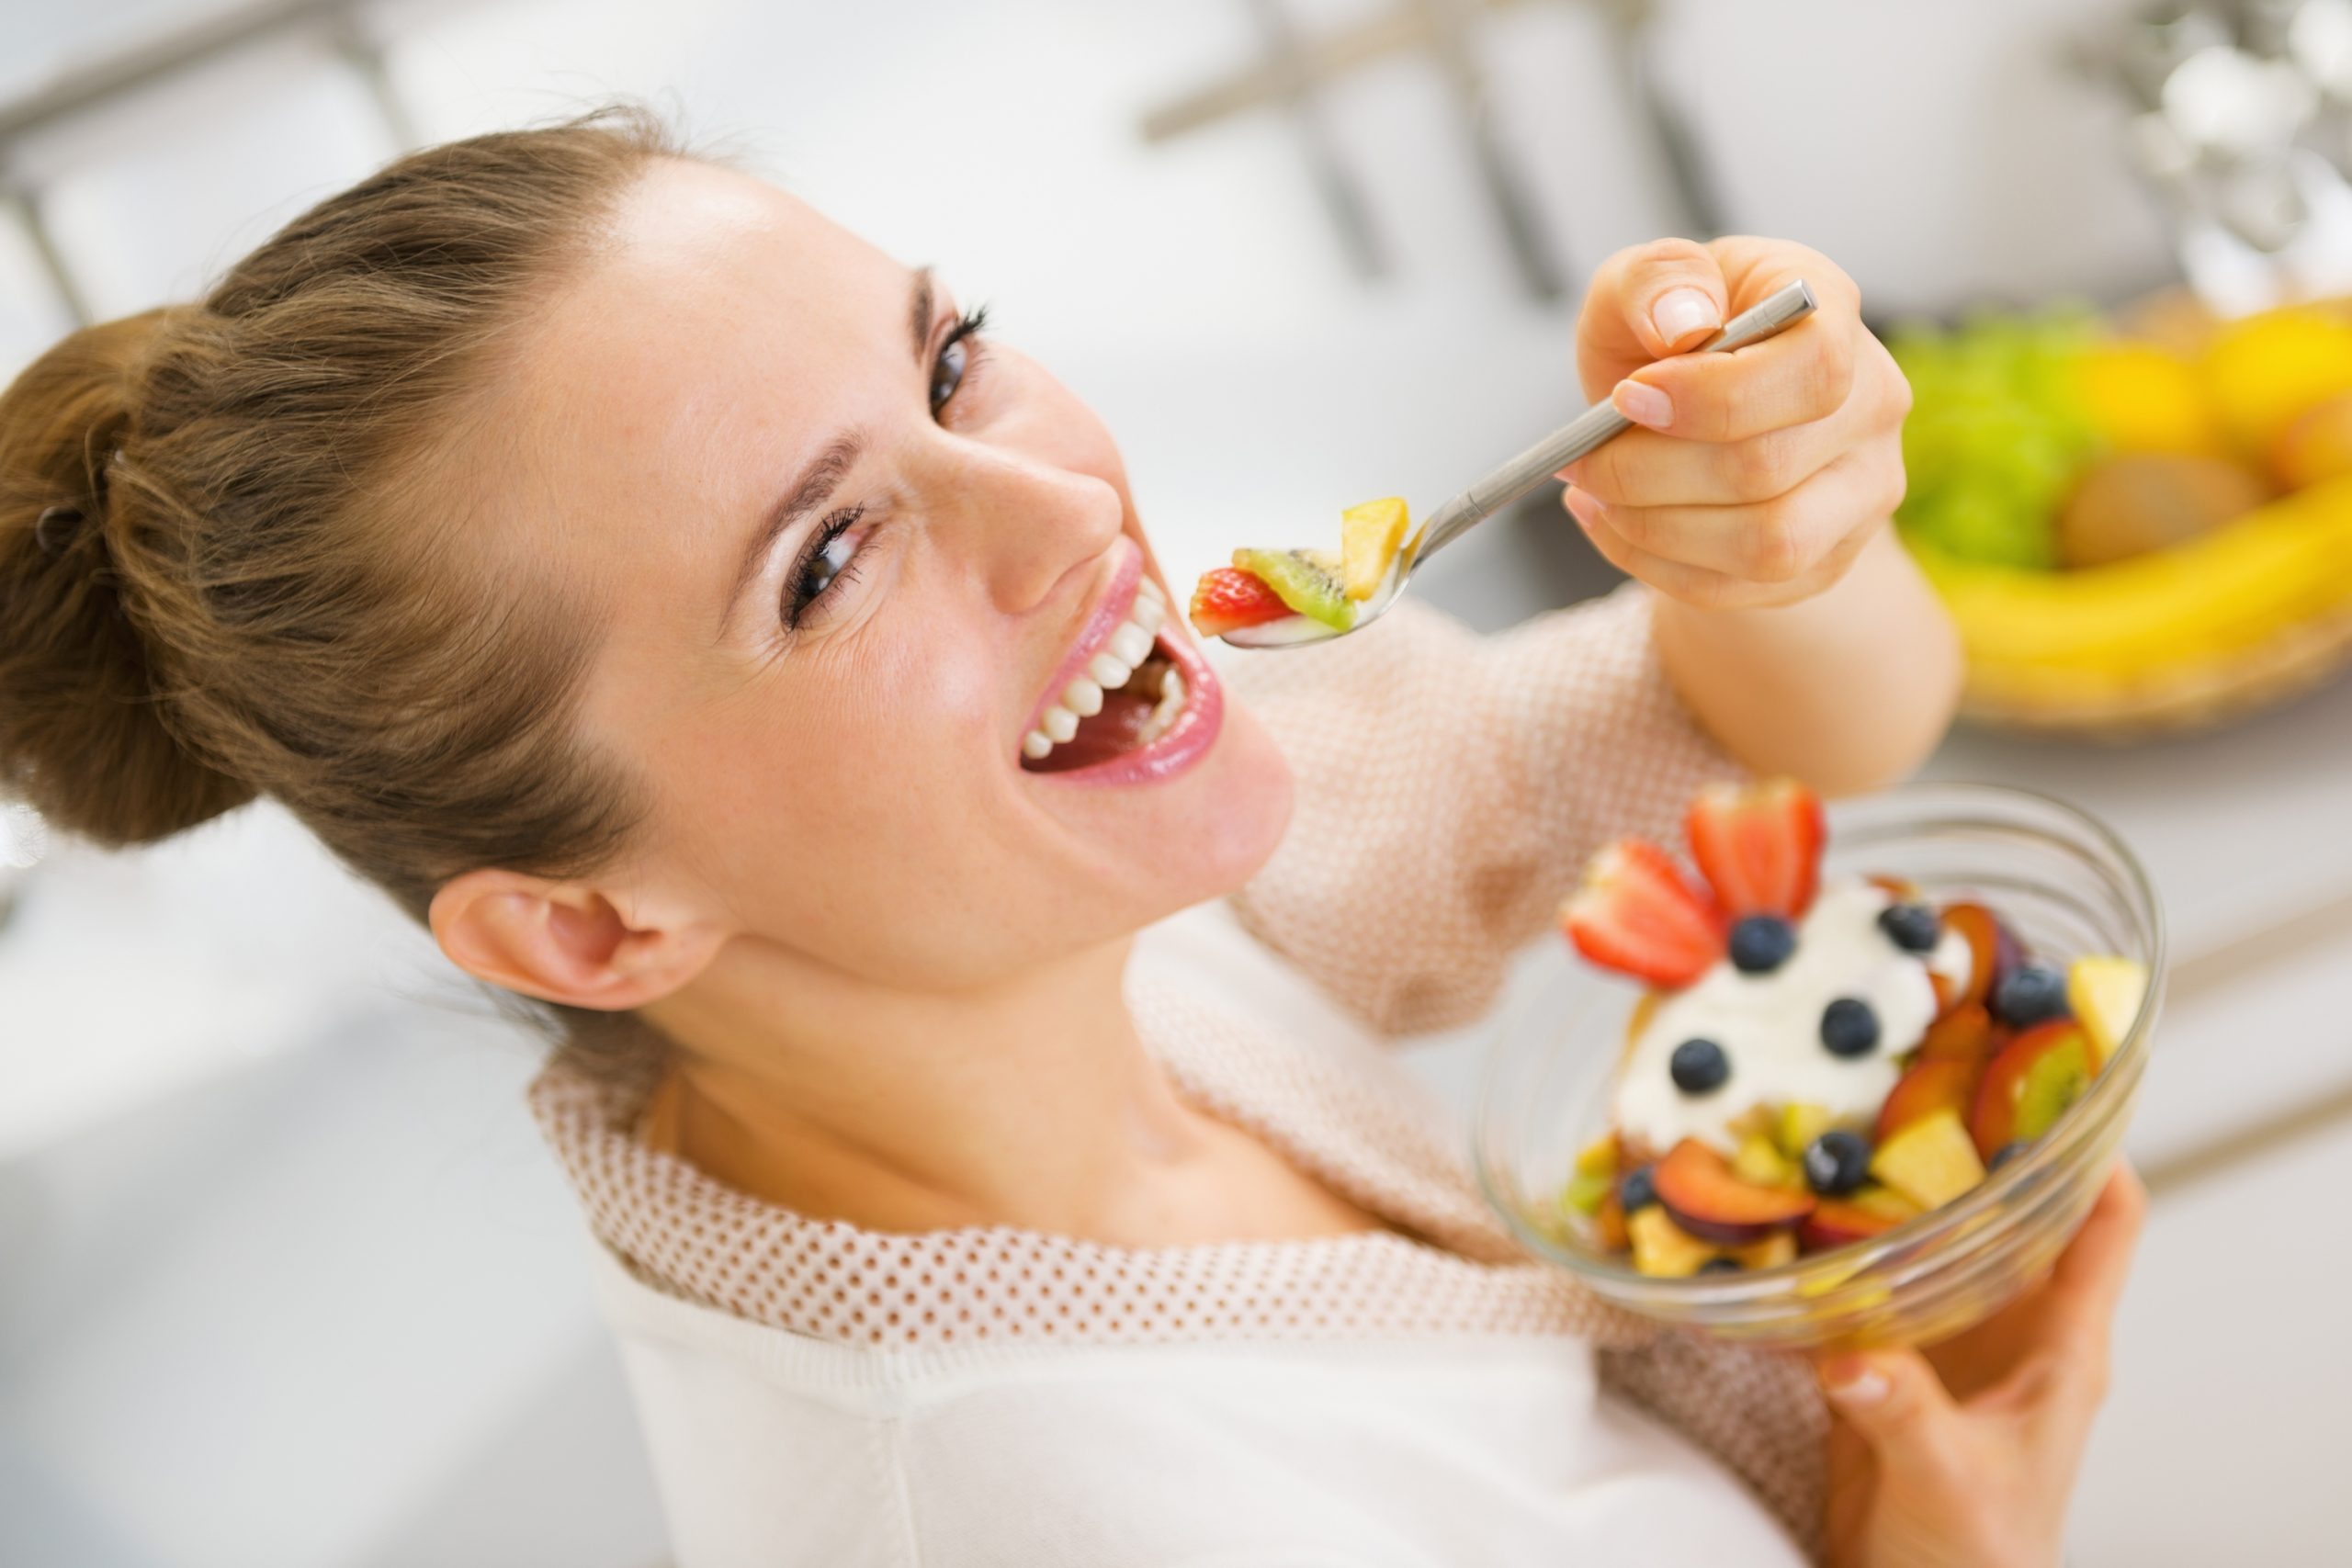 7 Undeniable Reasons to Start Eating Healthier